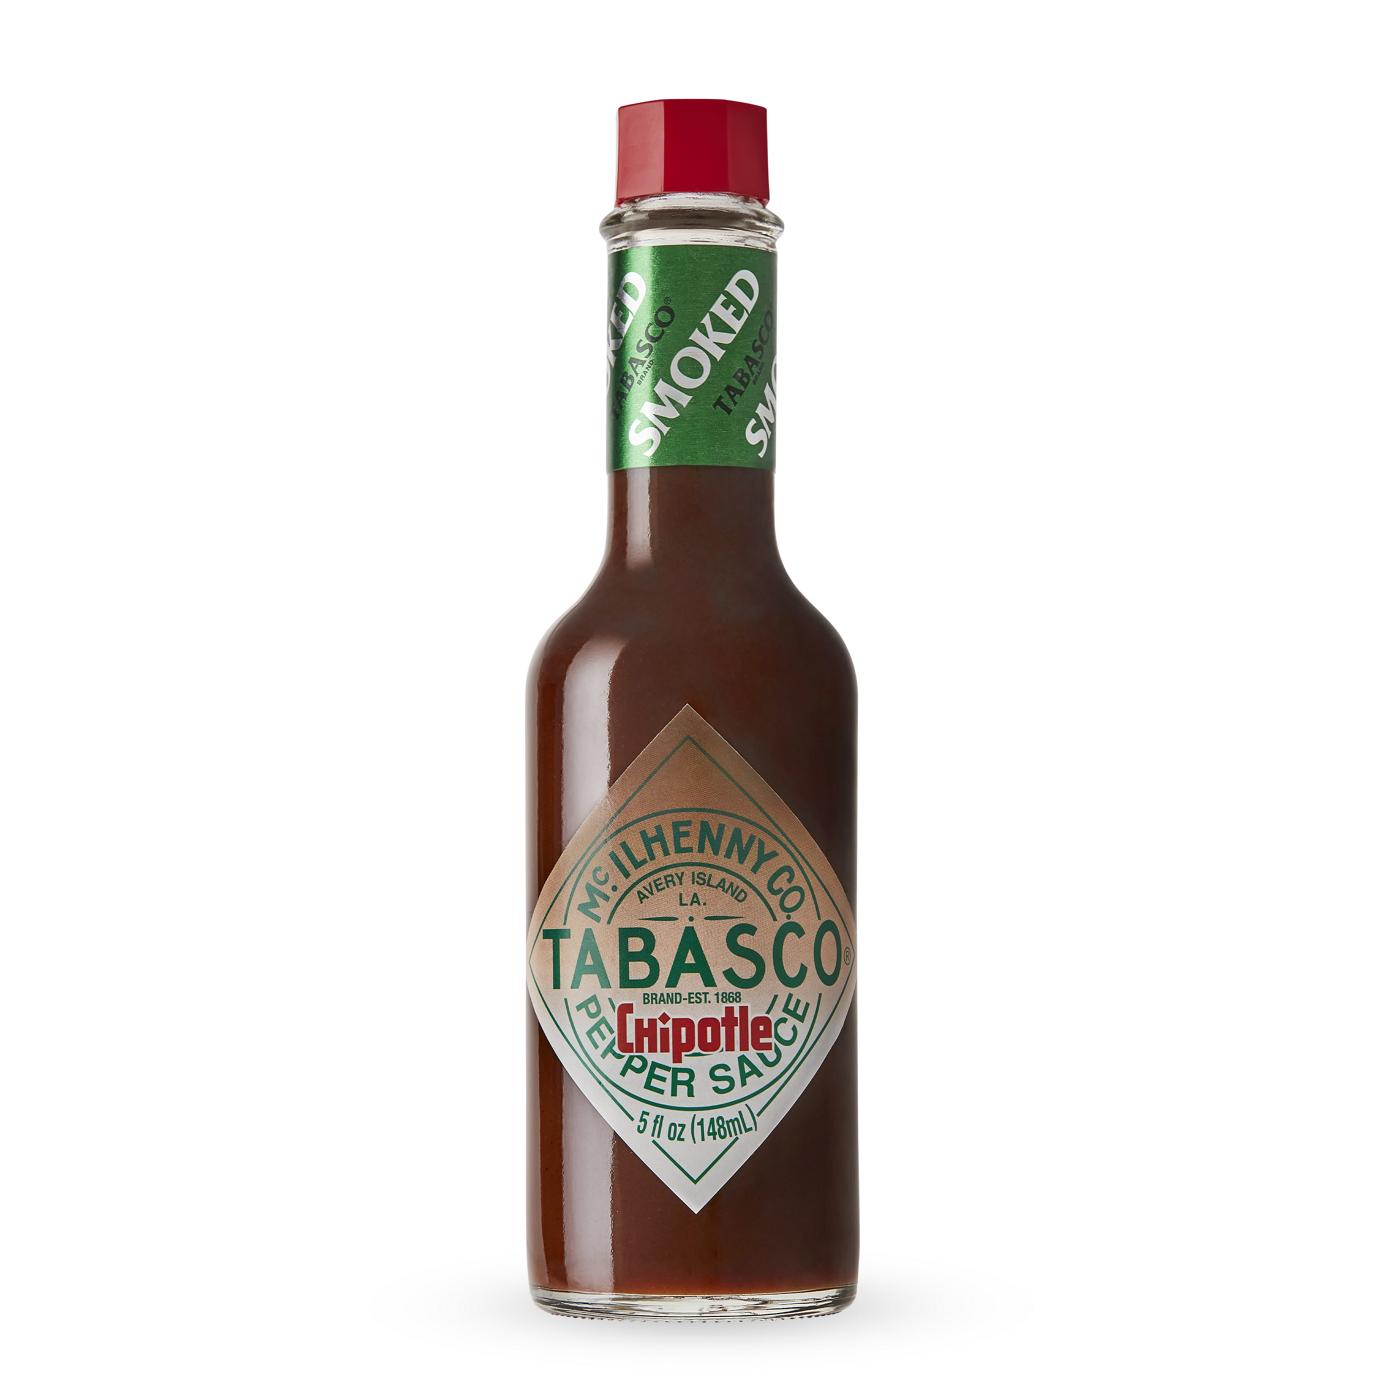 Tabasco Chipotle Pepper Sauce; image 1 of 8